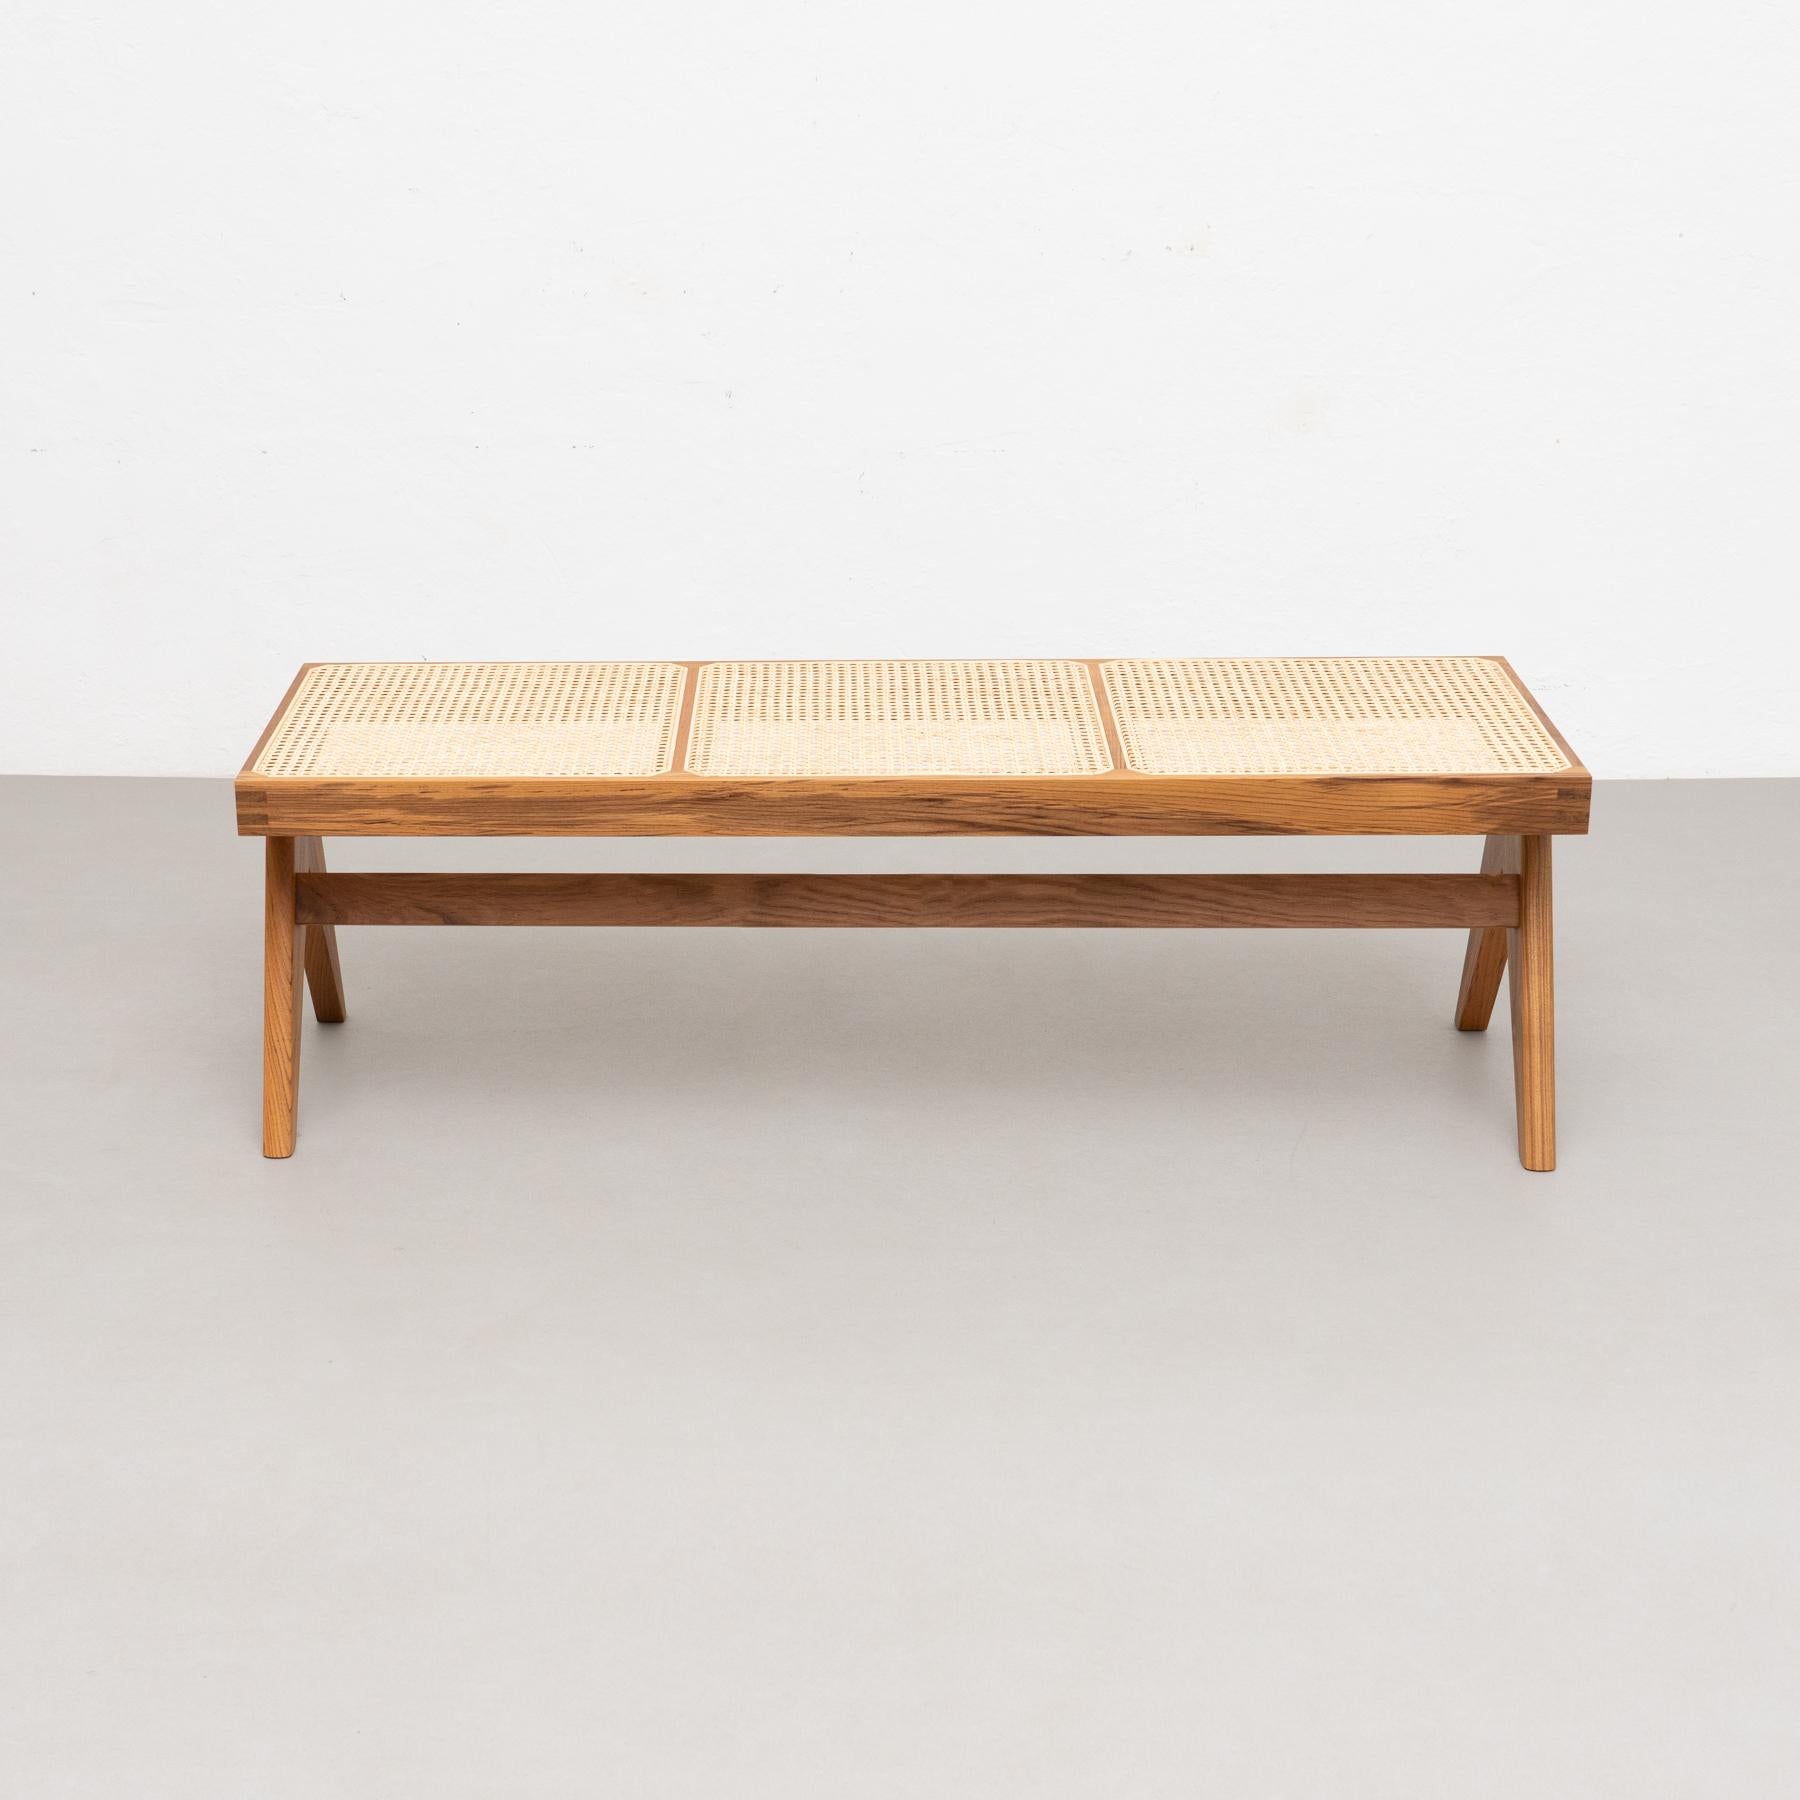 Contemporary Pierre Jeanneret 057 Civil Bench, Wood and Woven Viennese Cane by Cassina